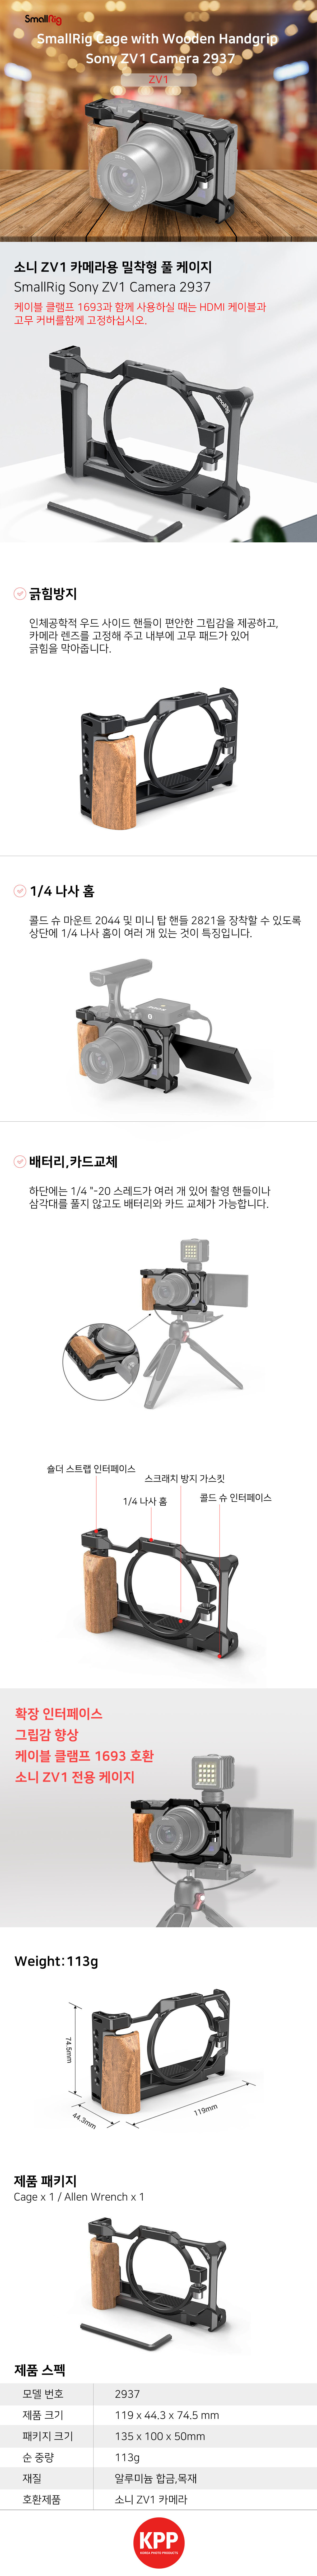 Cage-with-Wooden-Handgrip-Sony-ZV1-Camera-2937-01.jpg